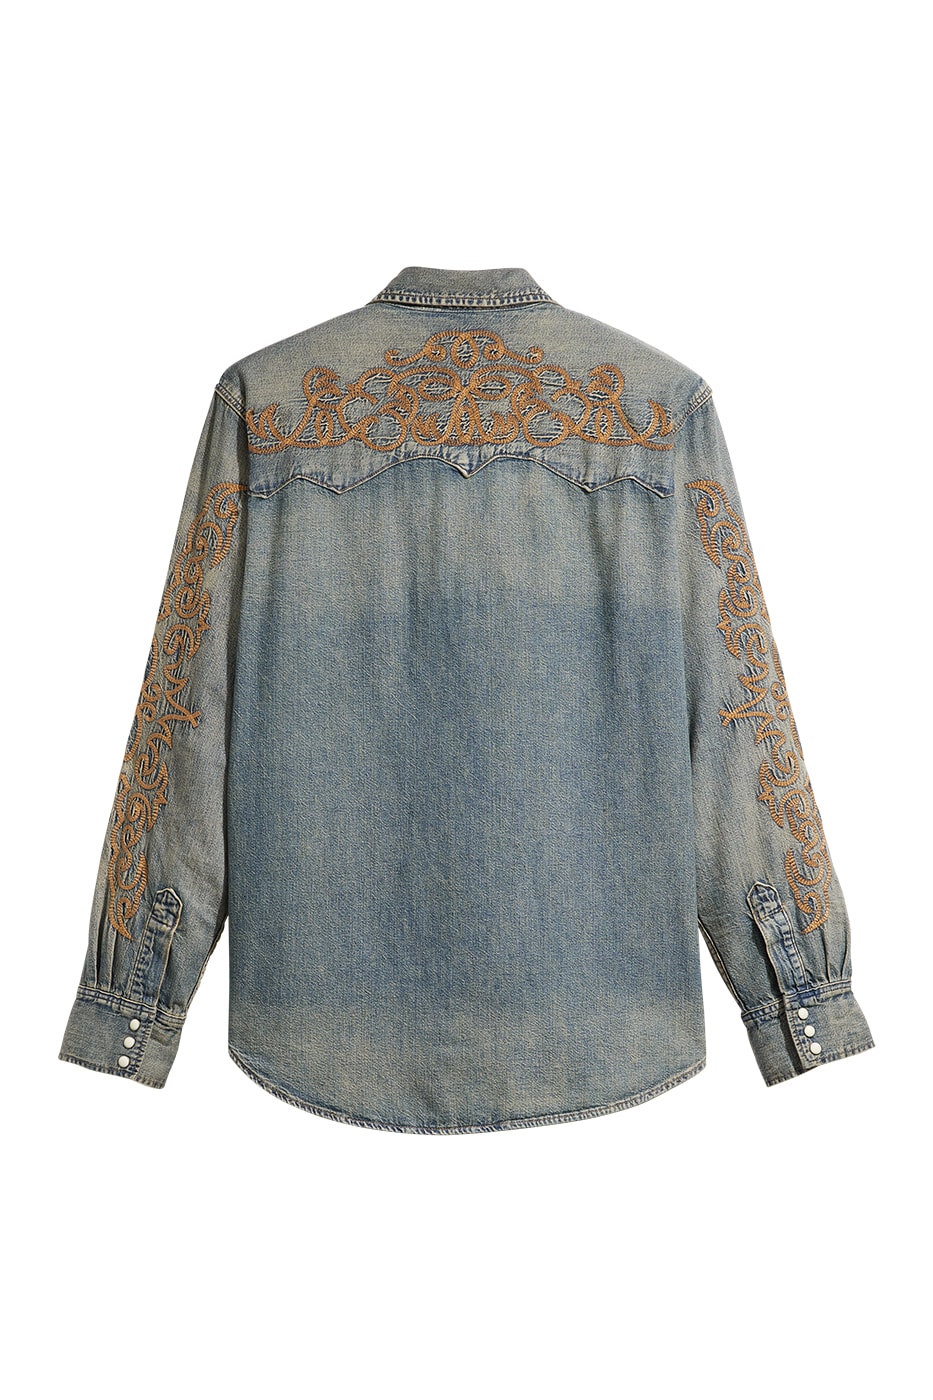 Latest Levi's x Denim Tears Collaboration Pays Homage to the Black Biker Community release info tremaine emory jeans leather jackets motorcycle